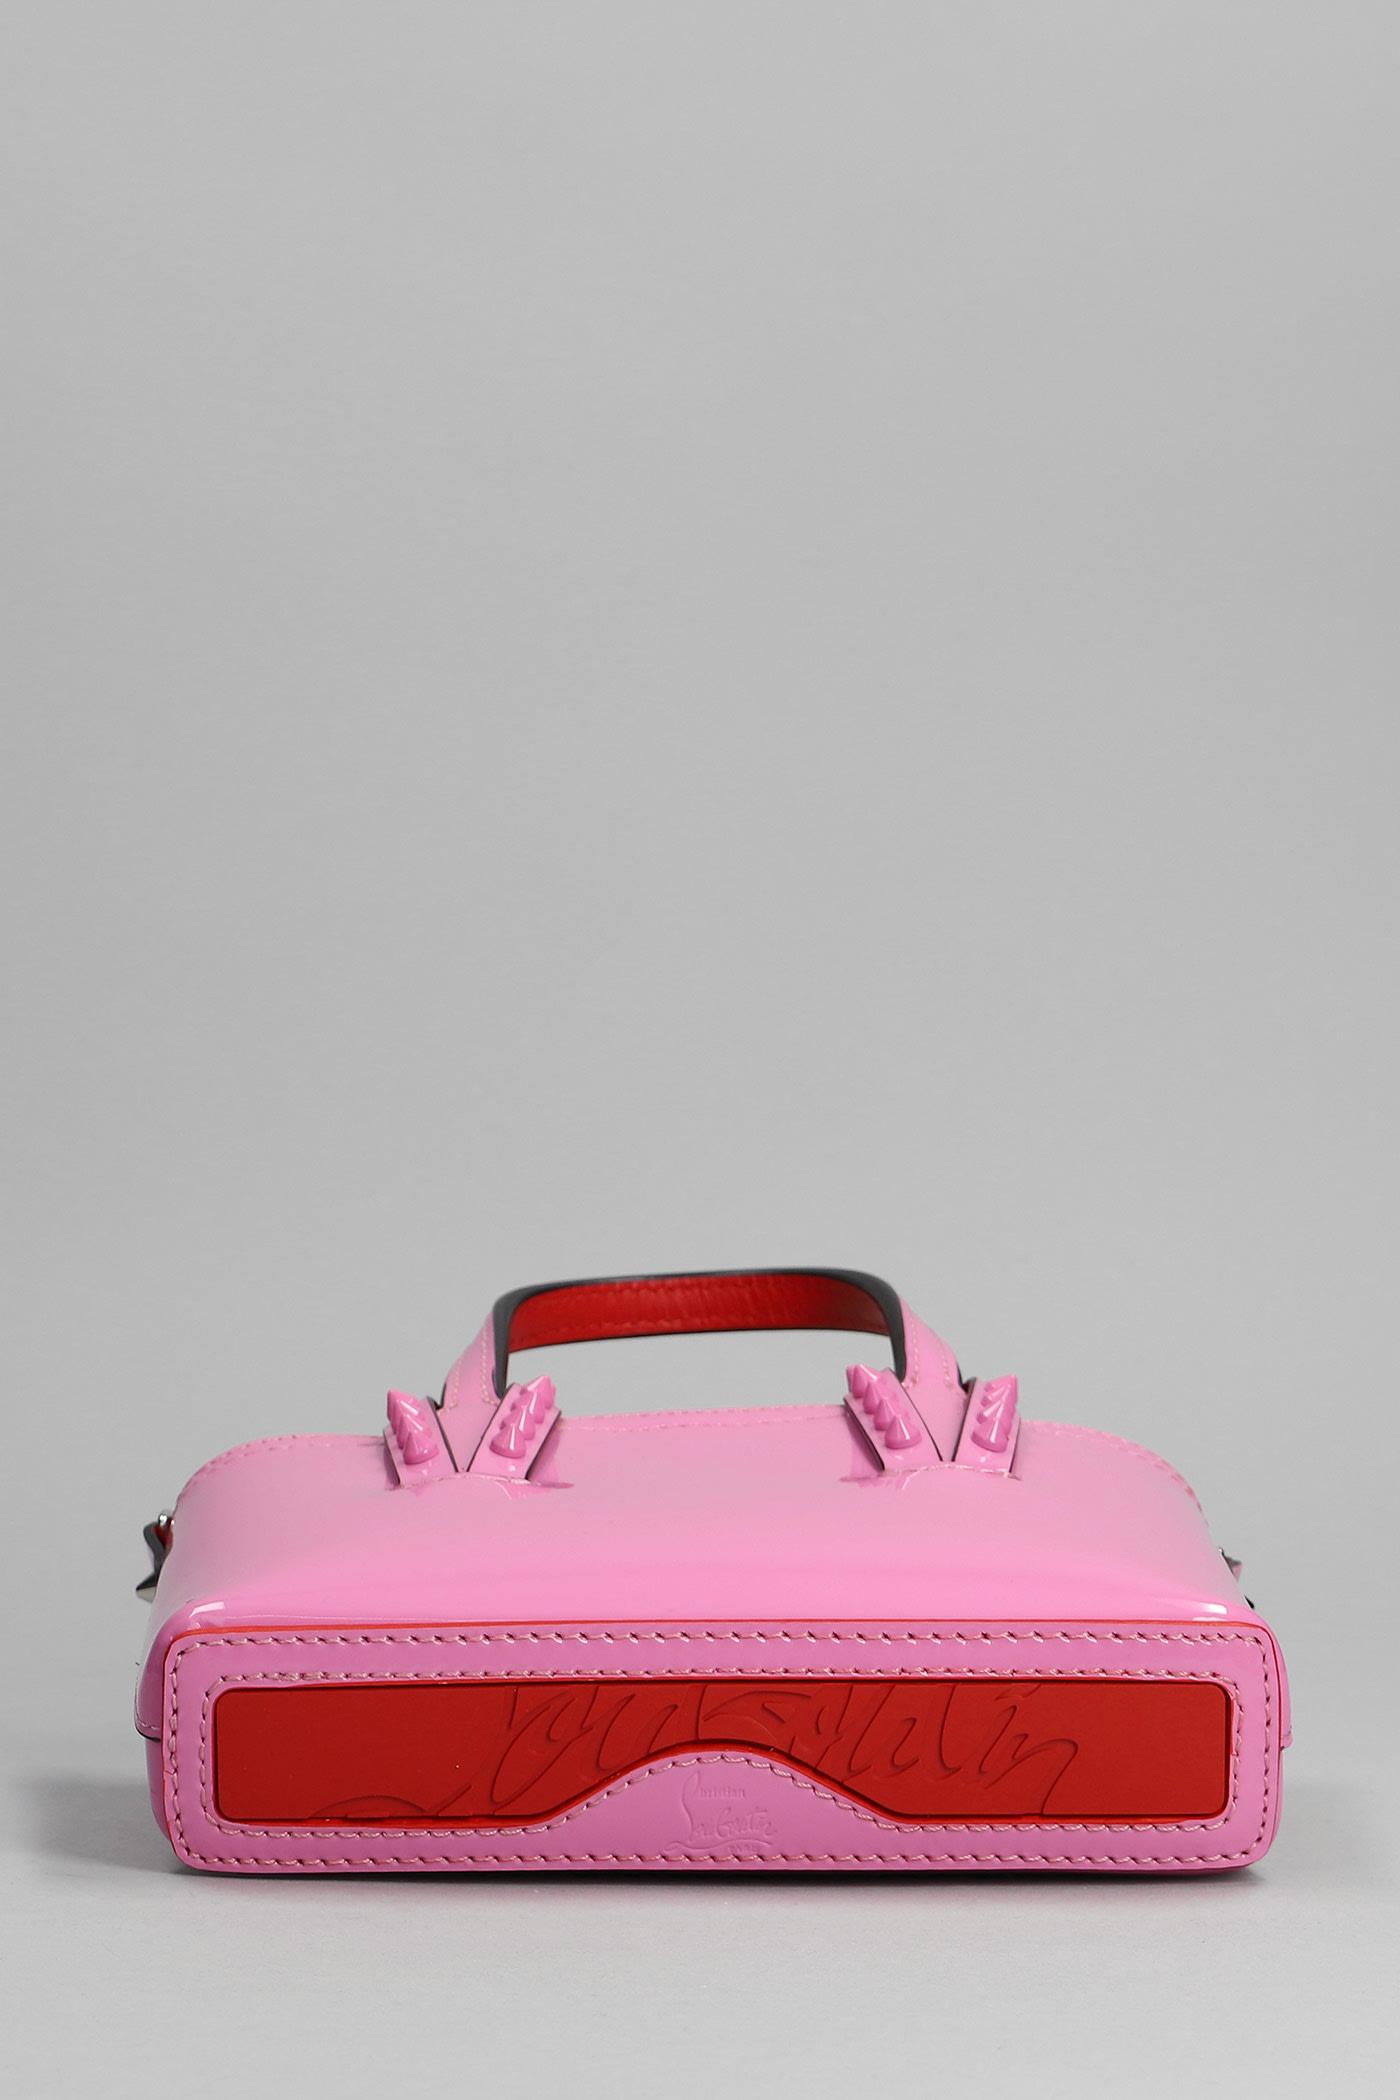 Christian Louboutin Cabata Hand Bag In Patent Leather in Pink